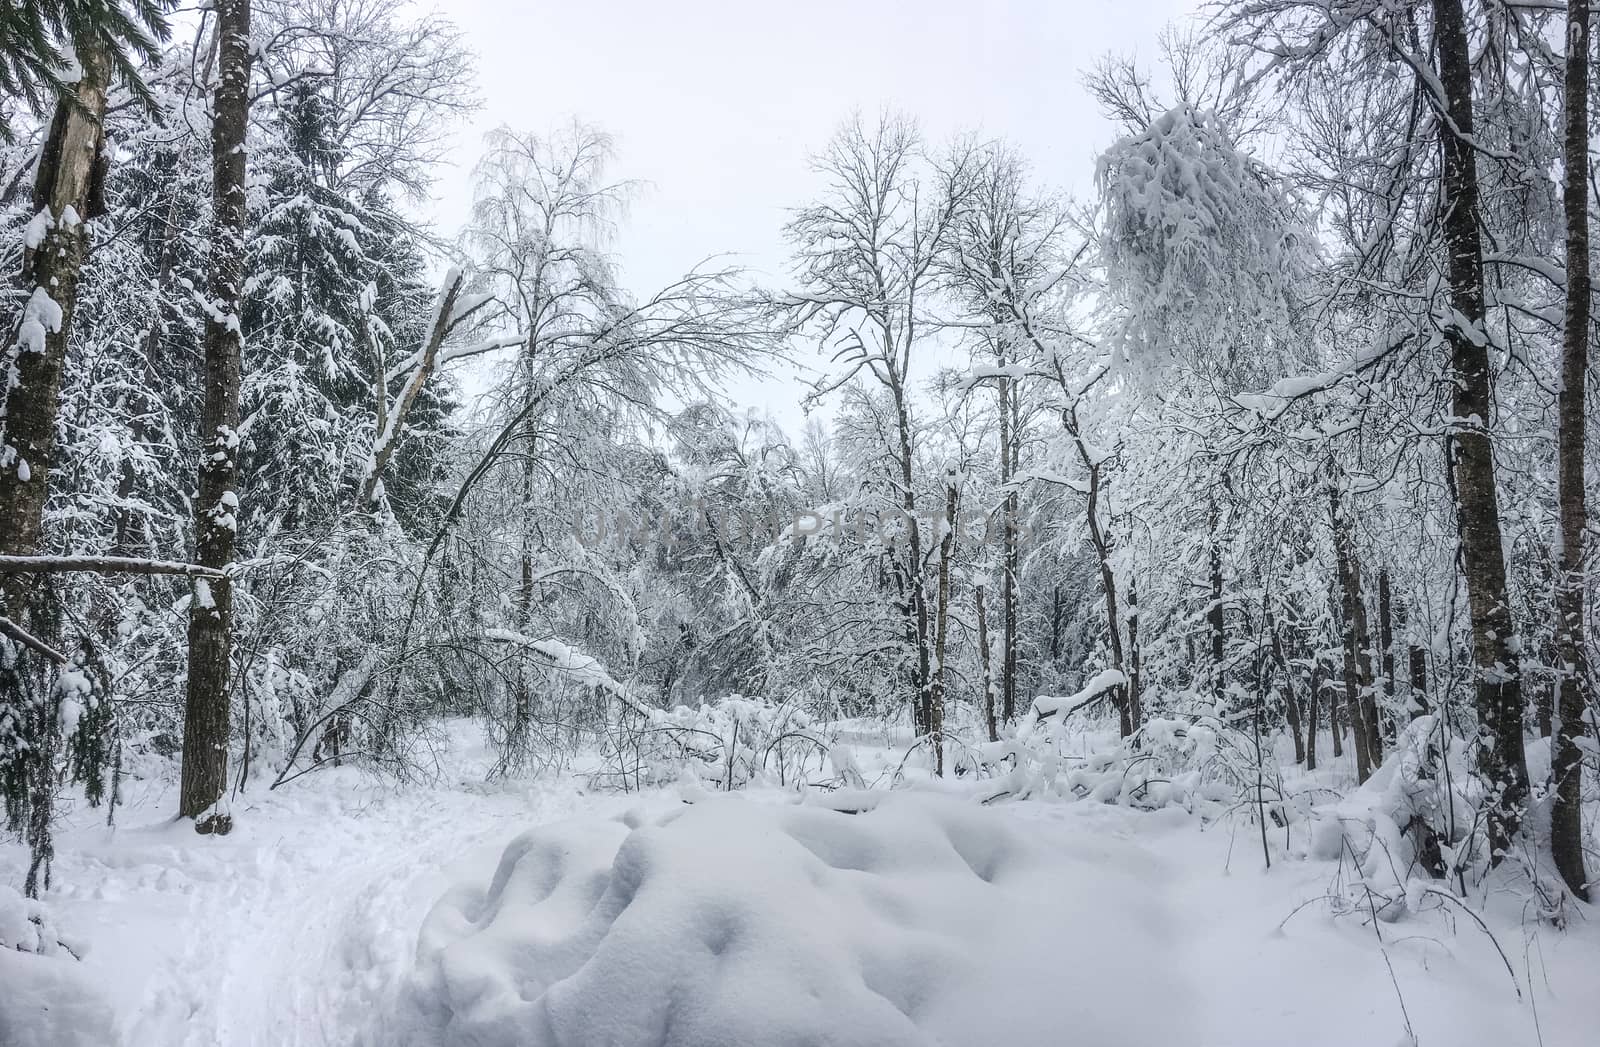 Panorama shot of a winter forest after heavy snowfal